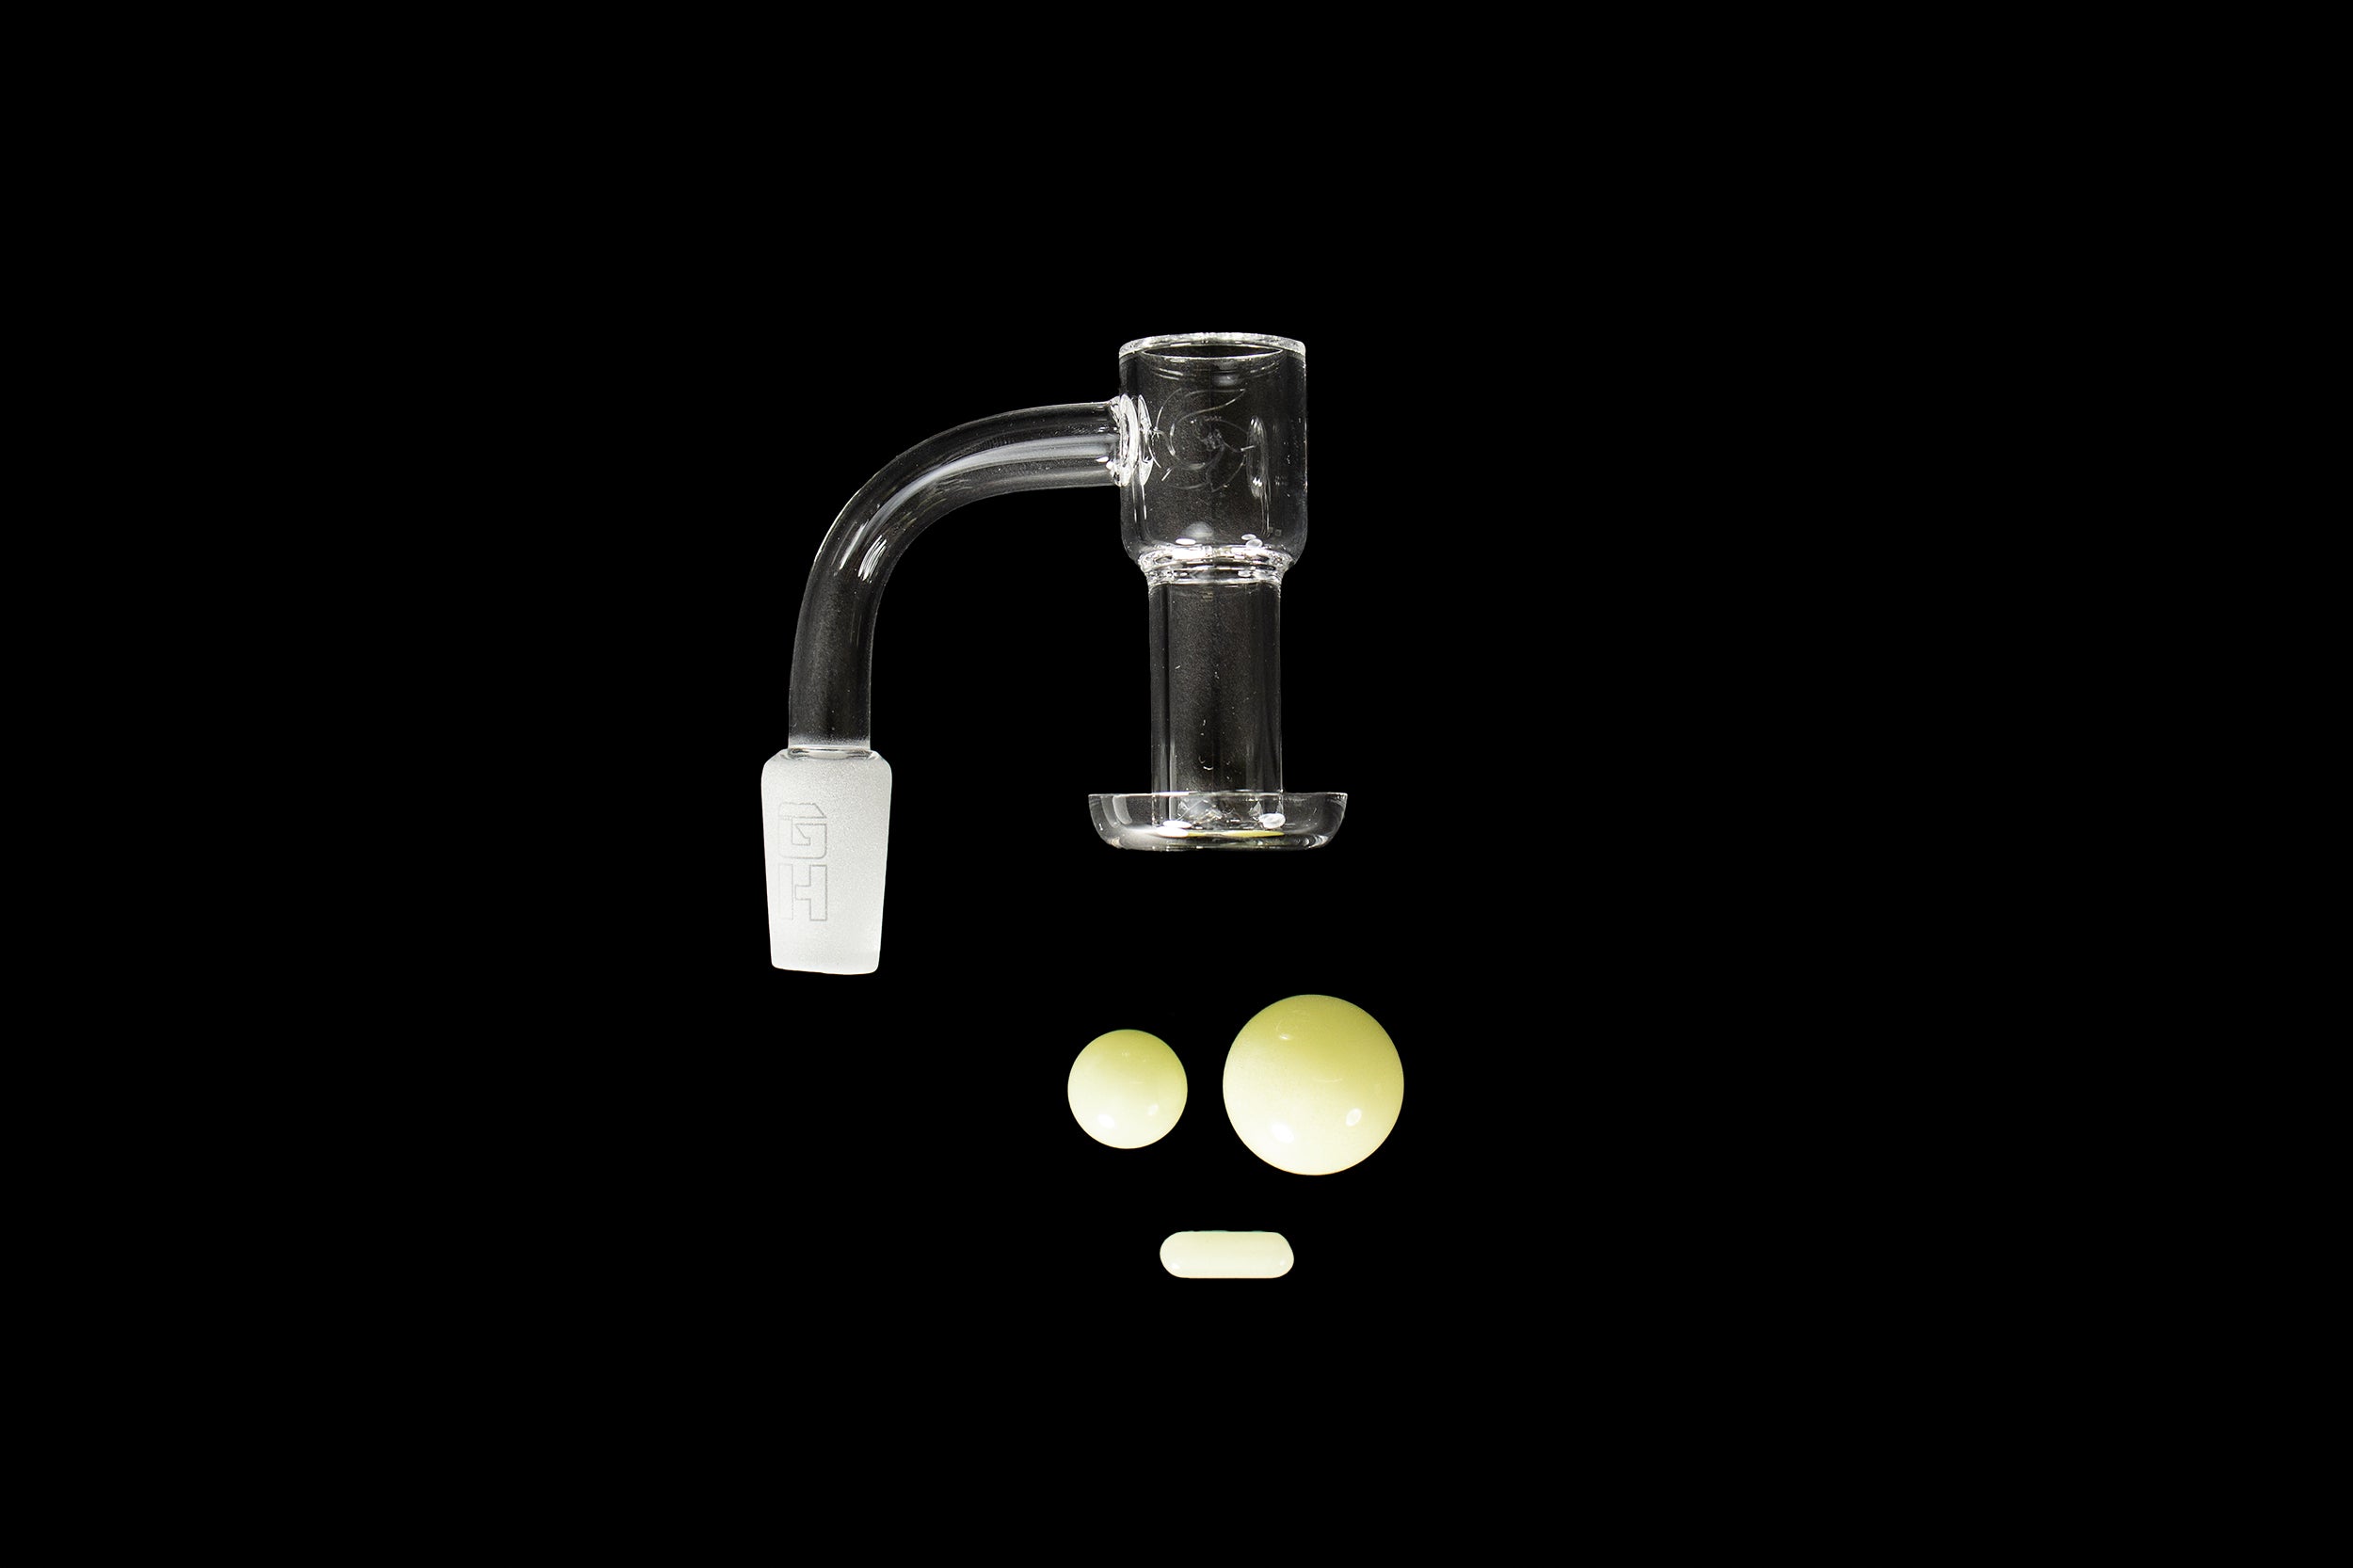 Glasshouse Terp Vacuum Kit 14 Male 20mm Cup with Beveled Top includes Glow in the Dark Capsule, 12mm Pearl and 20mm Dark Cap